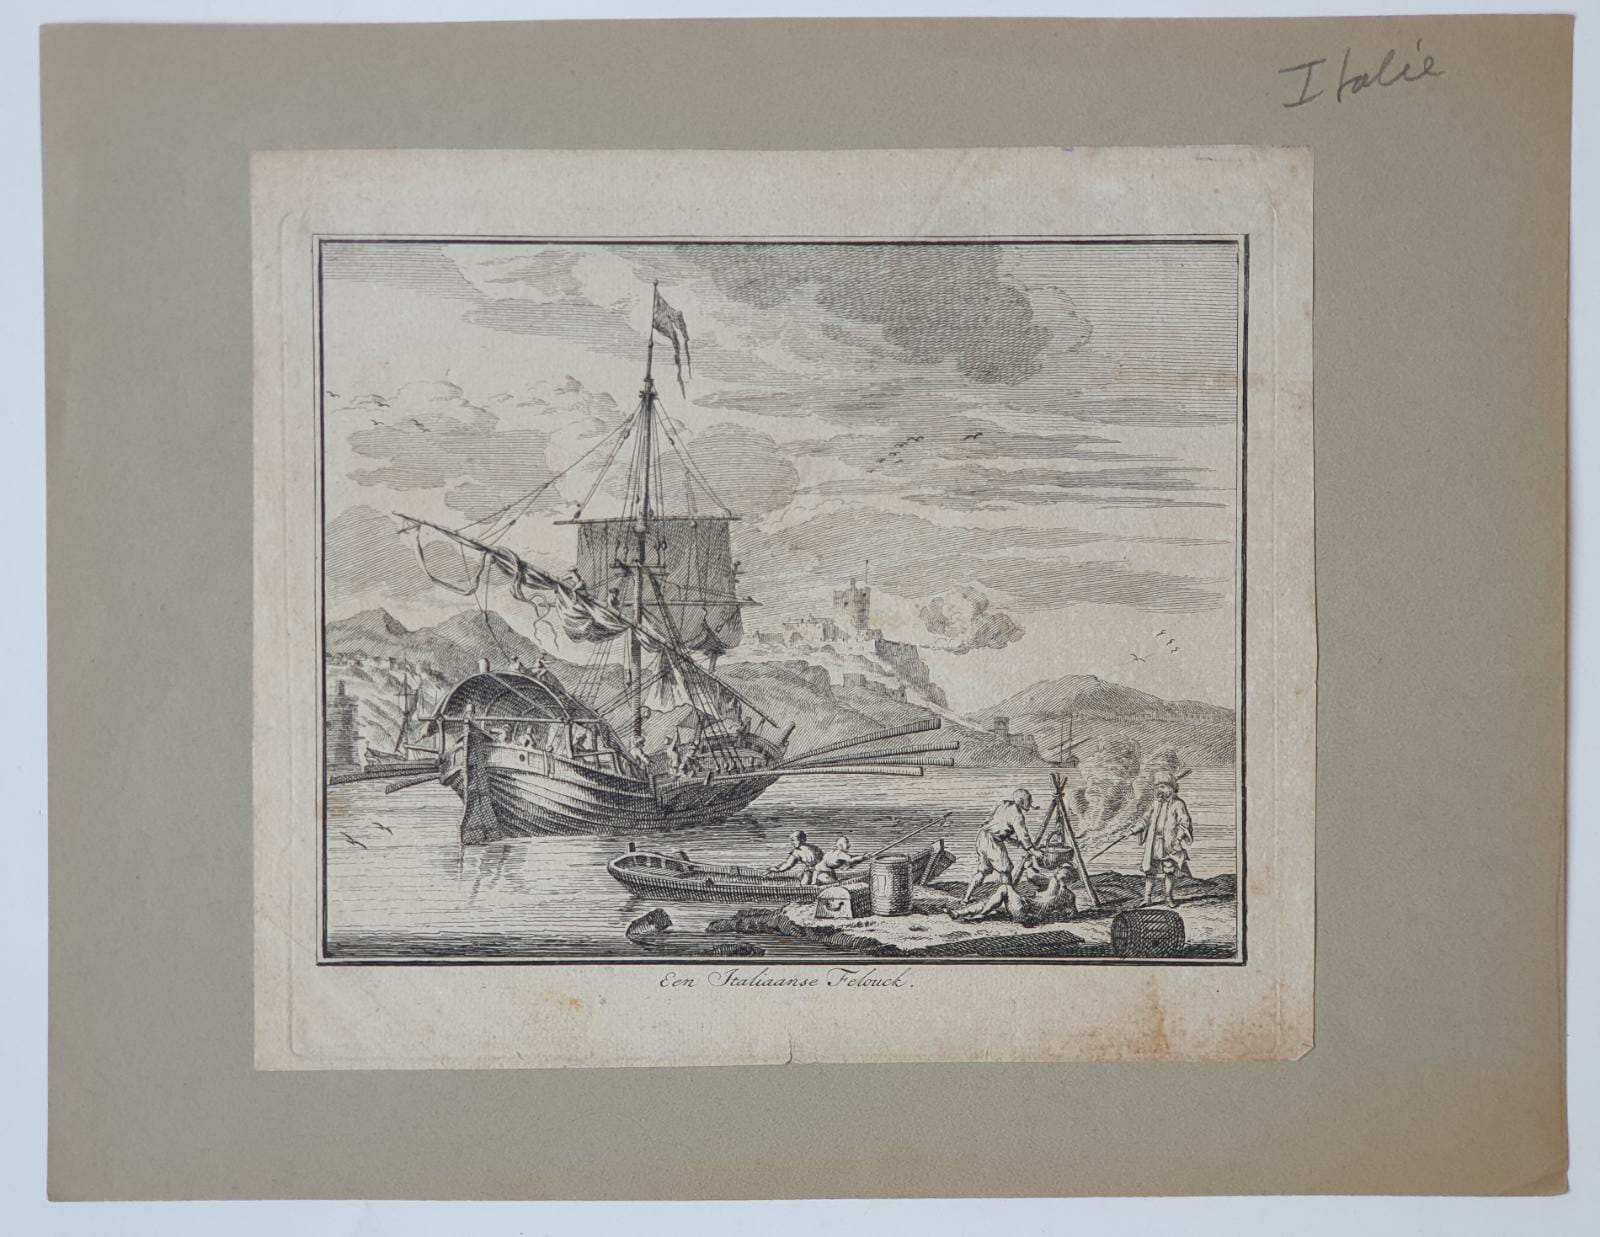 [Antique etching, ets] A.v.d. Laan, Een Italiaanse Felouck, published before 1800.